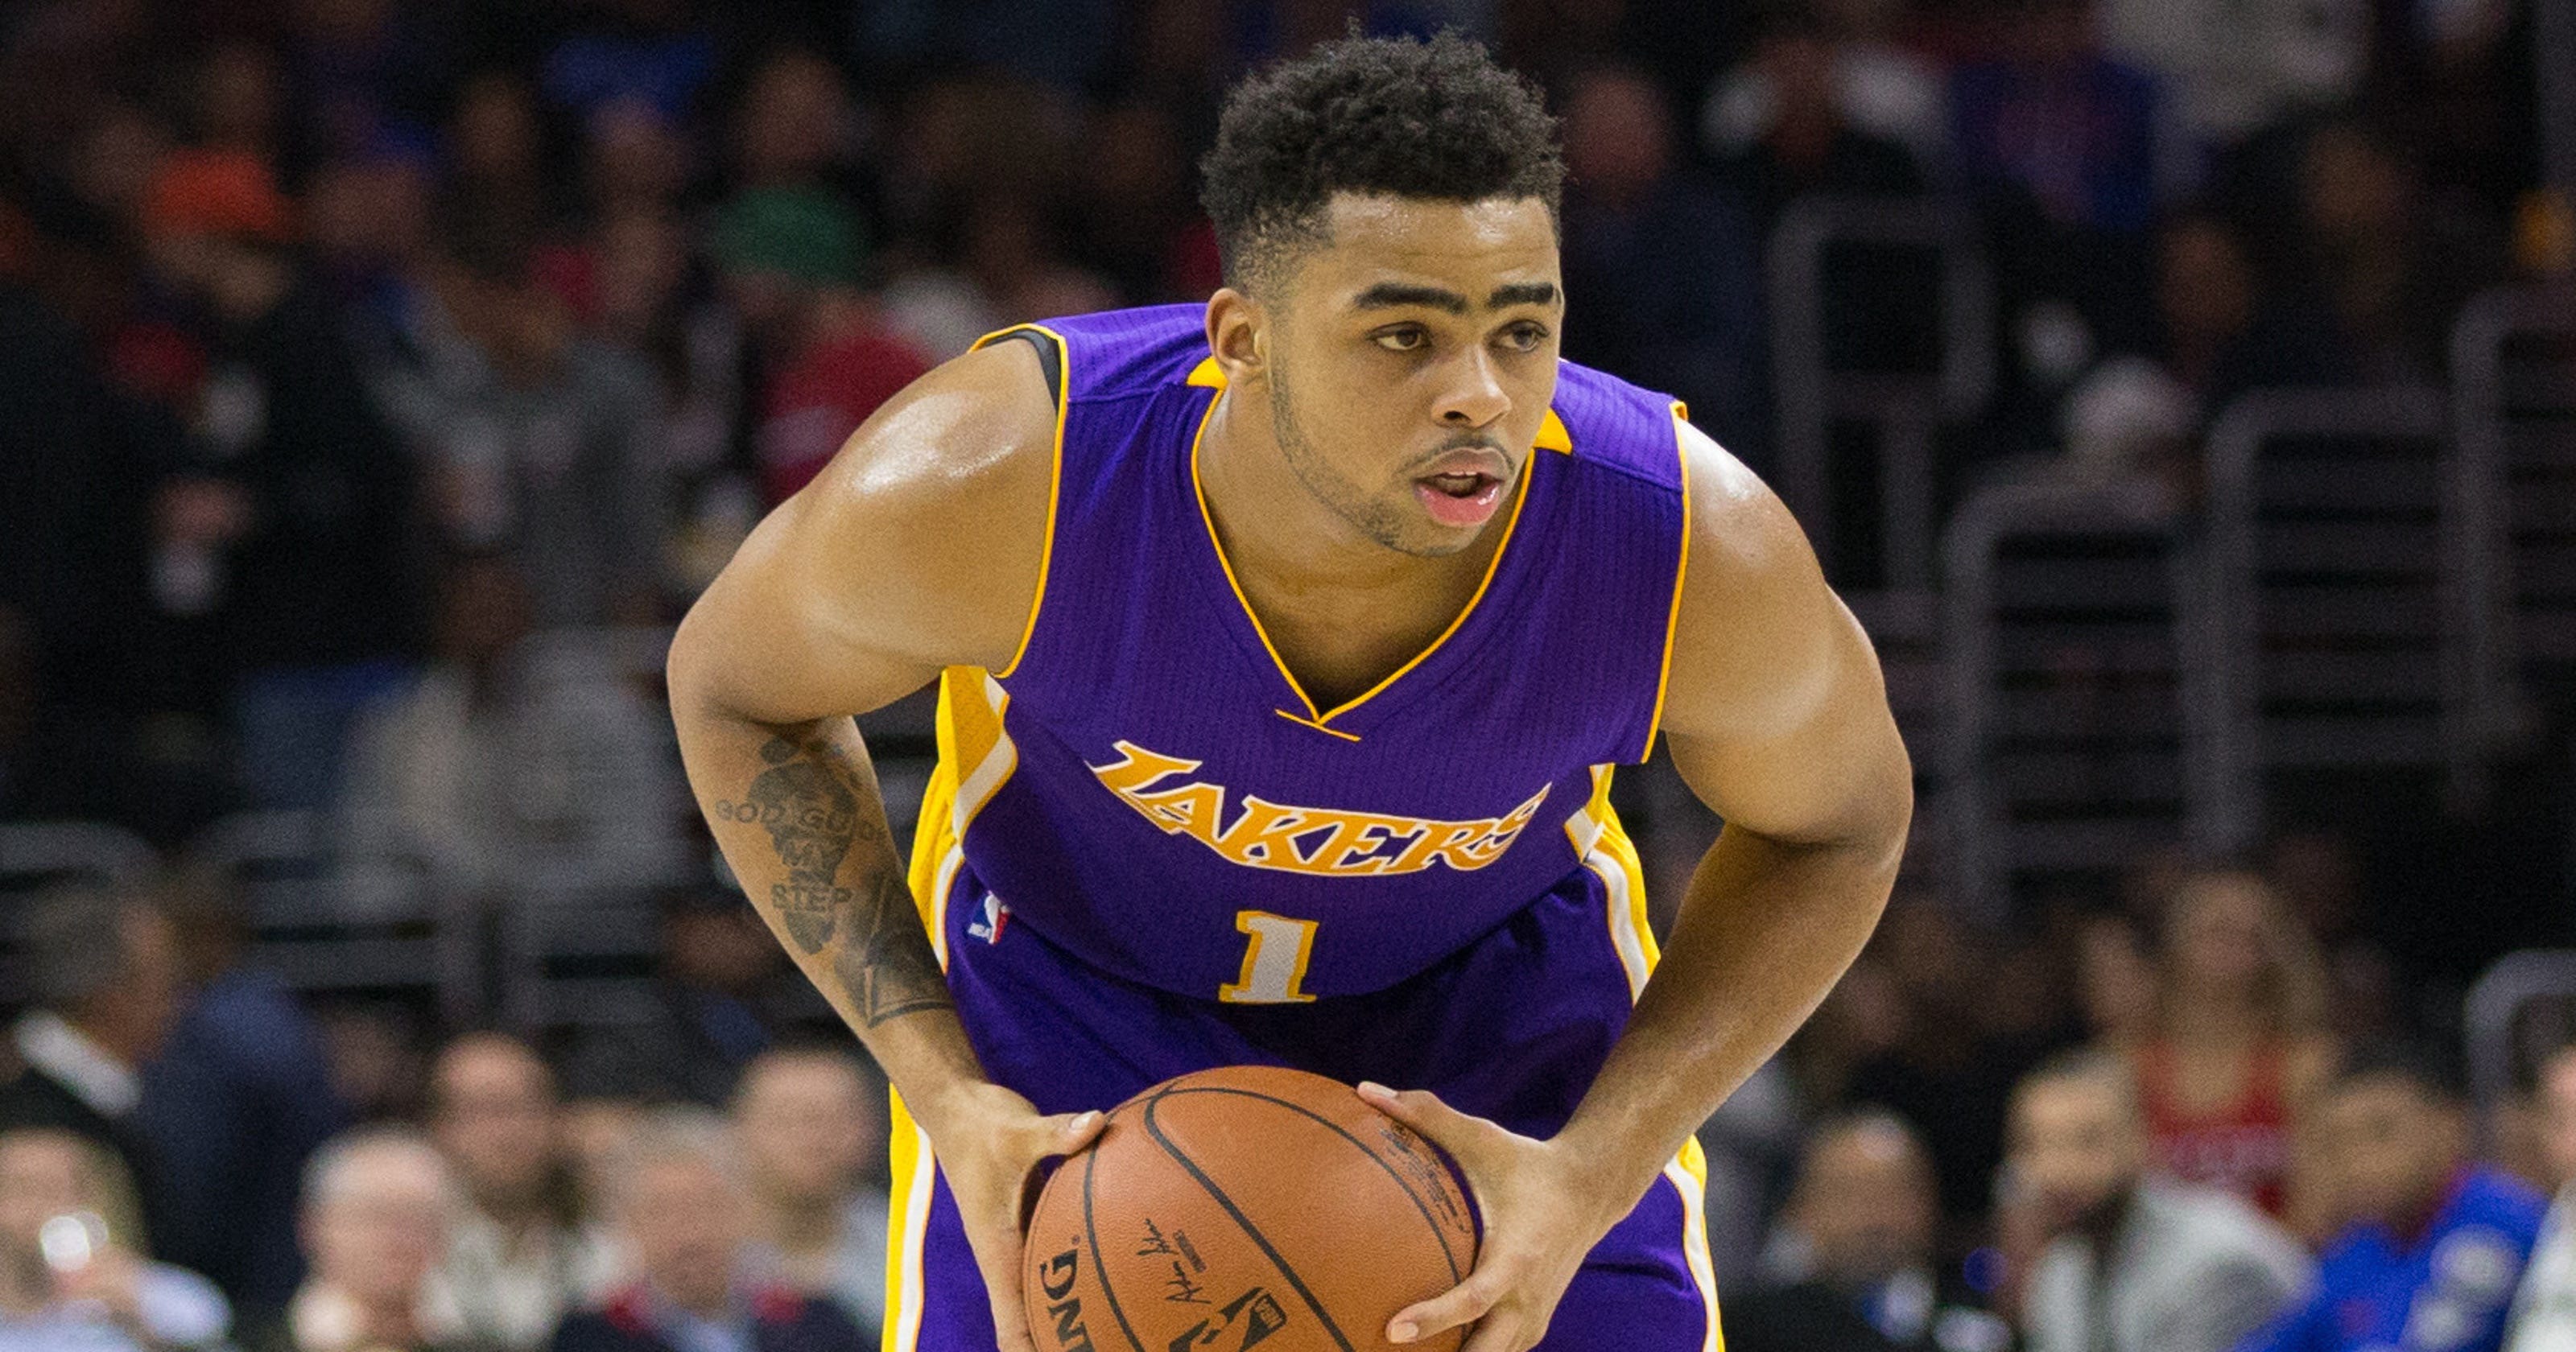 Weekly NBA rookie rankings: D'Angelo Russell making strides as starter